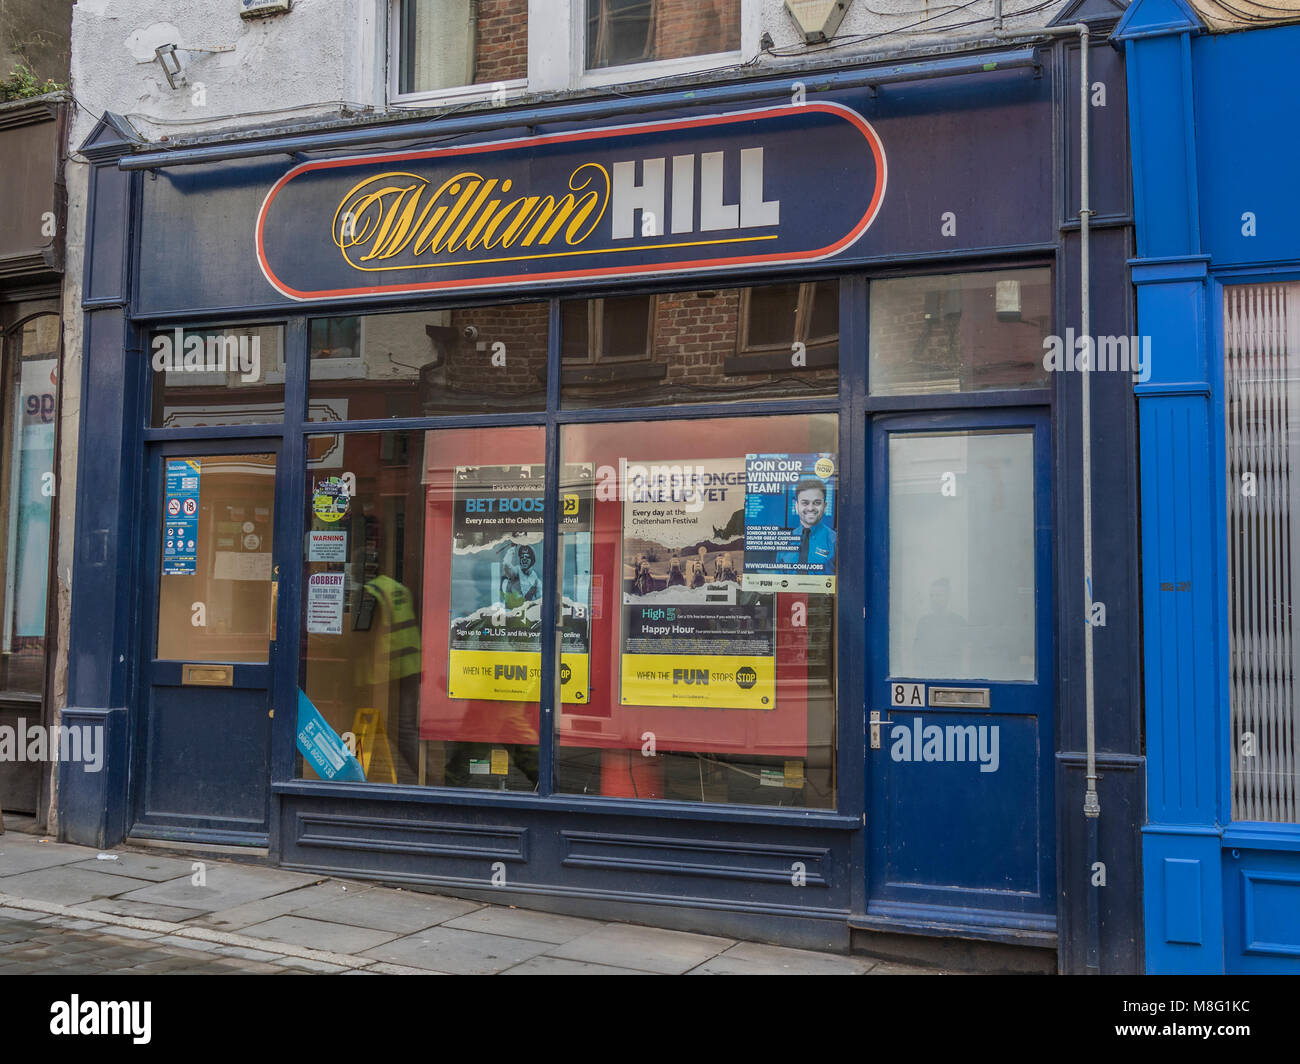 William Hill betting shop, Stockport Town Centre Shopping area, Merseyway Stock Photo